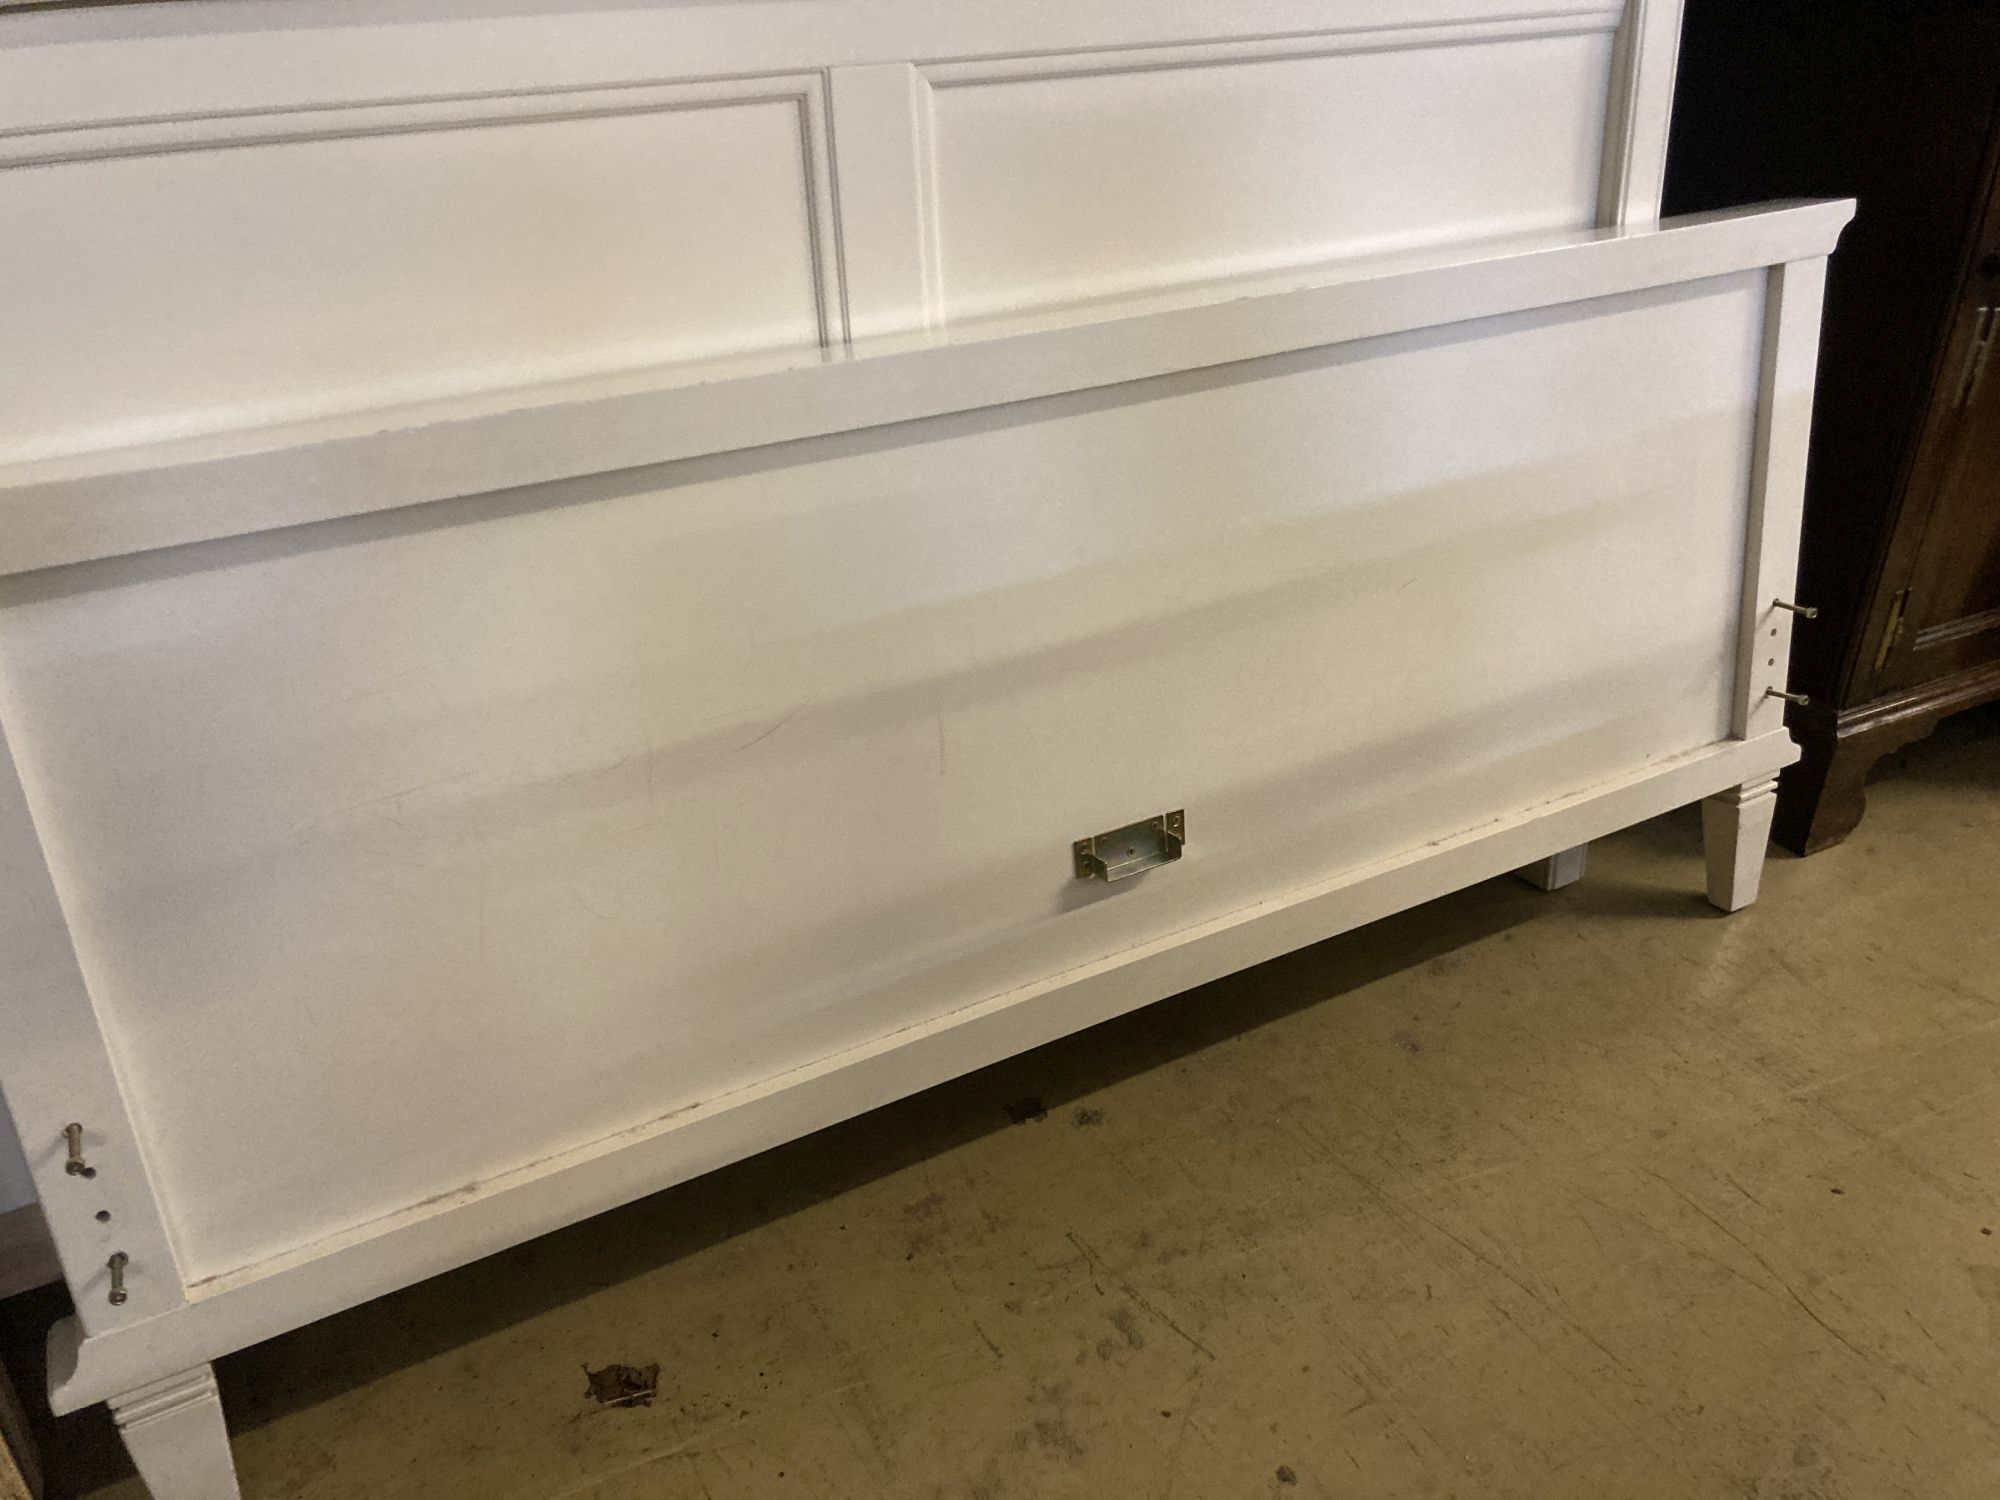 A contemporary white painted five foot bedframe, headboard height 102cm